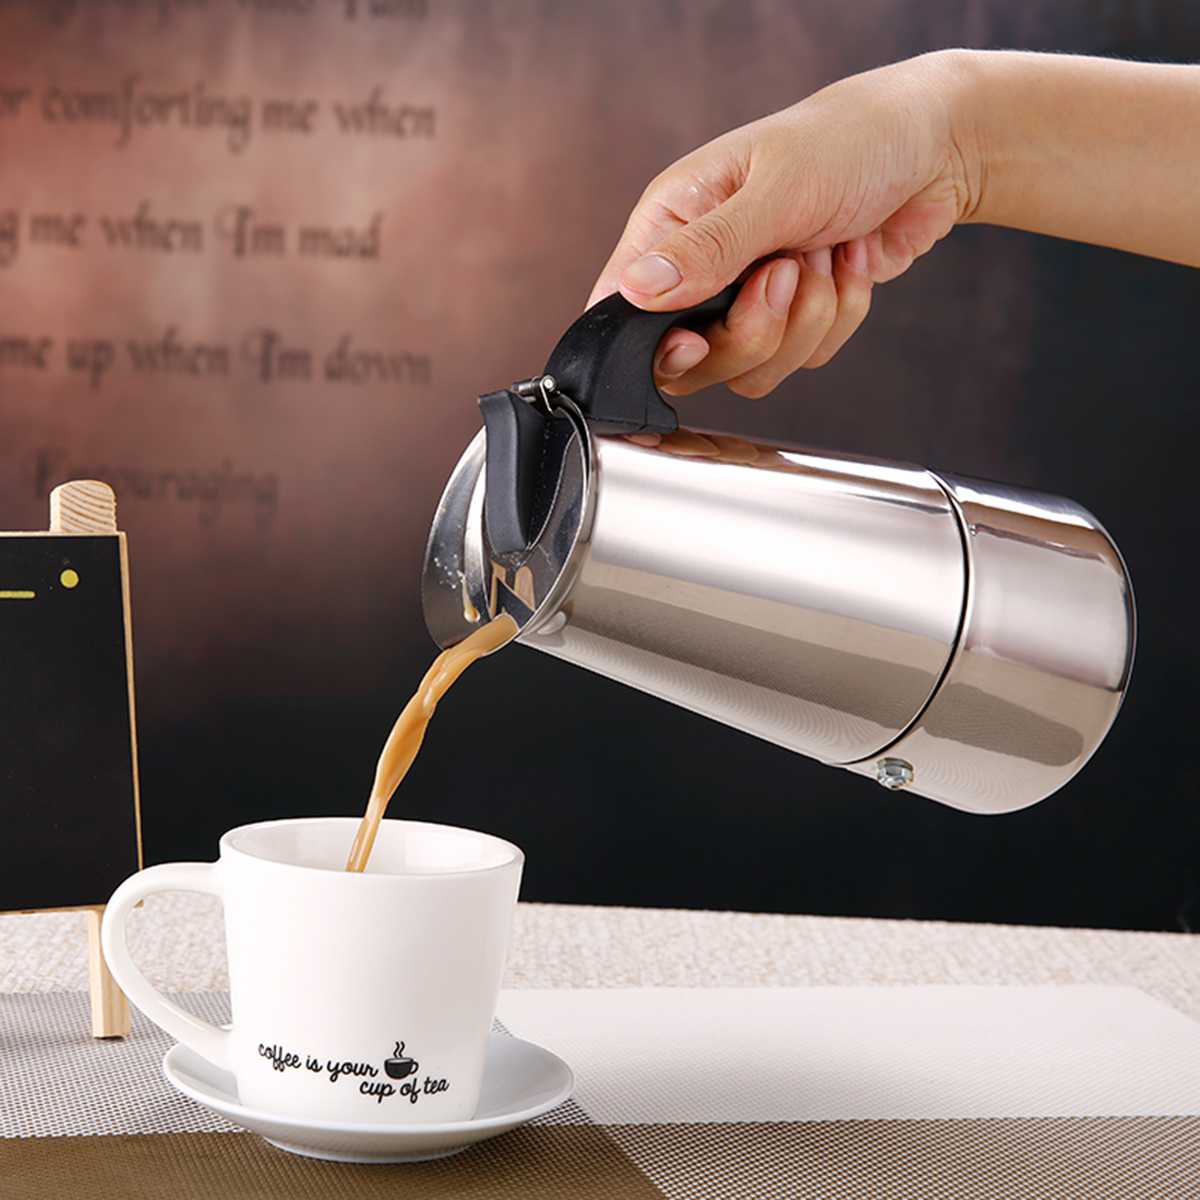 450ML Portable Espresso Coffee Maker Moka Pot Stainless Steel with Electric Cooker Filter Percolator Coffee Brewer Kettle